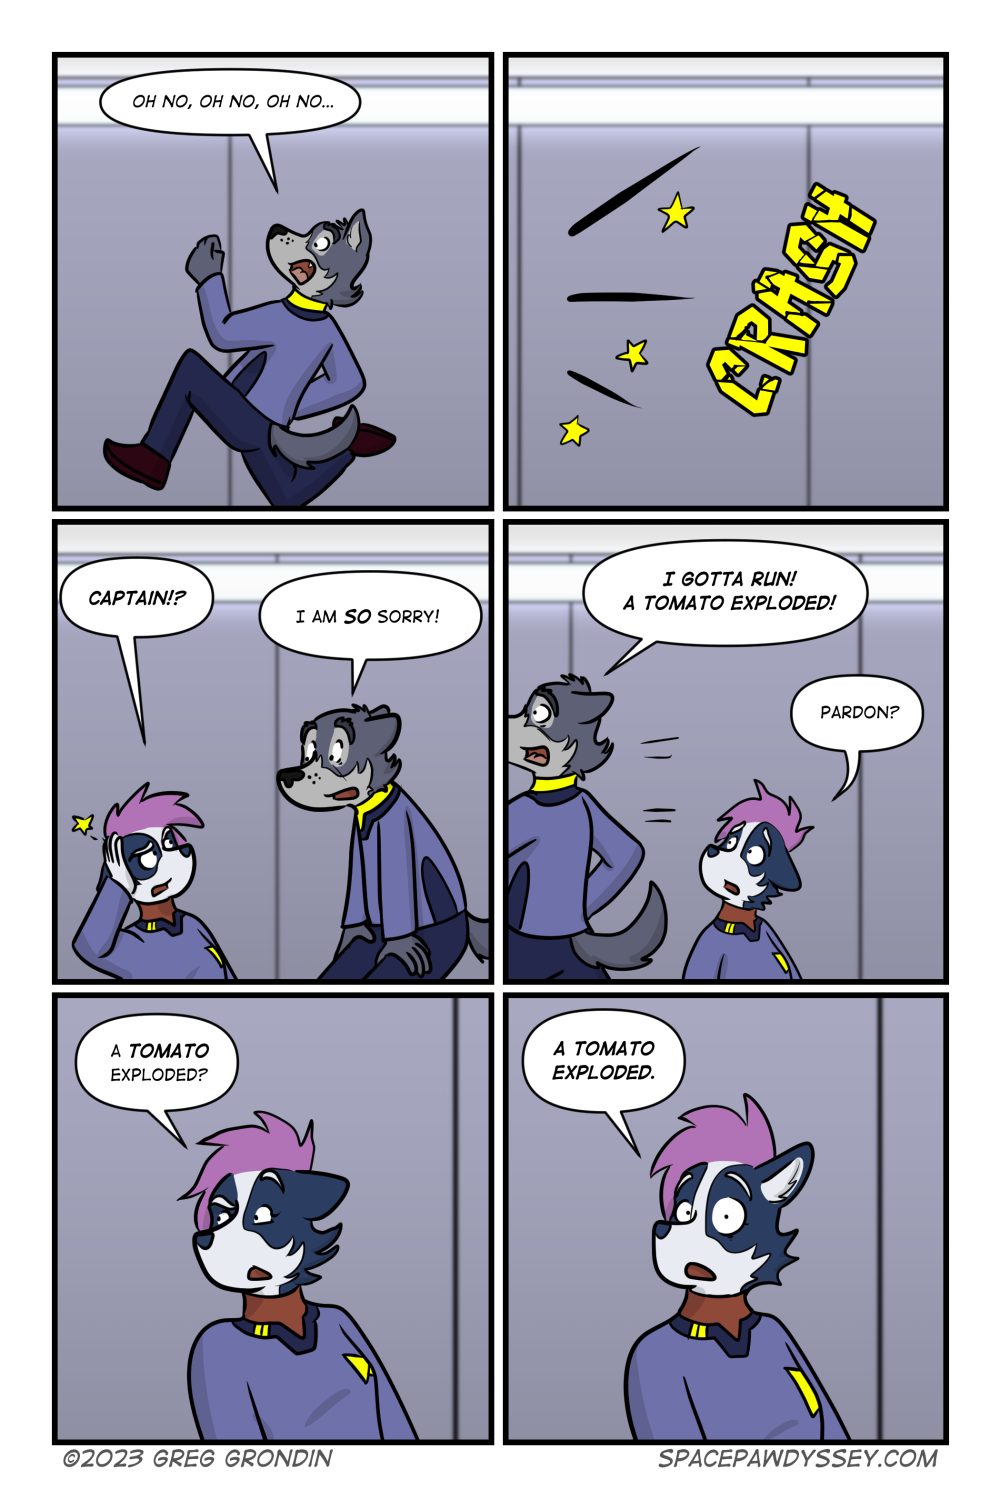 Space Pawdyssey #627